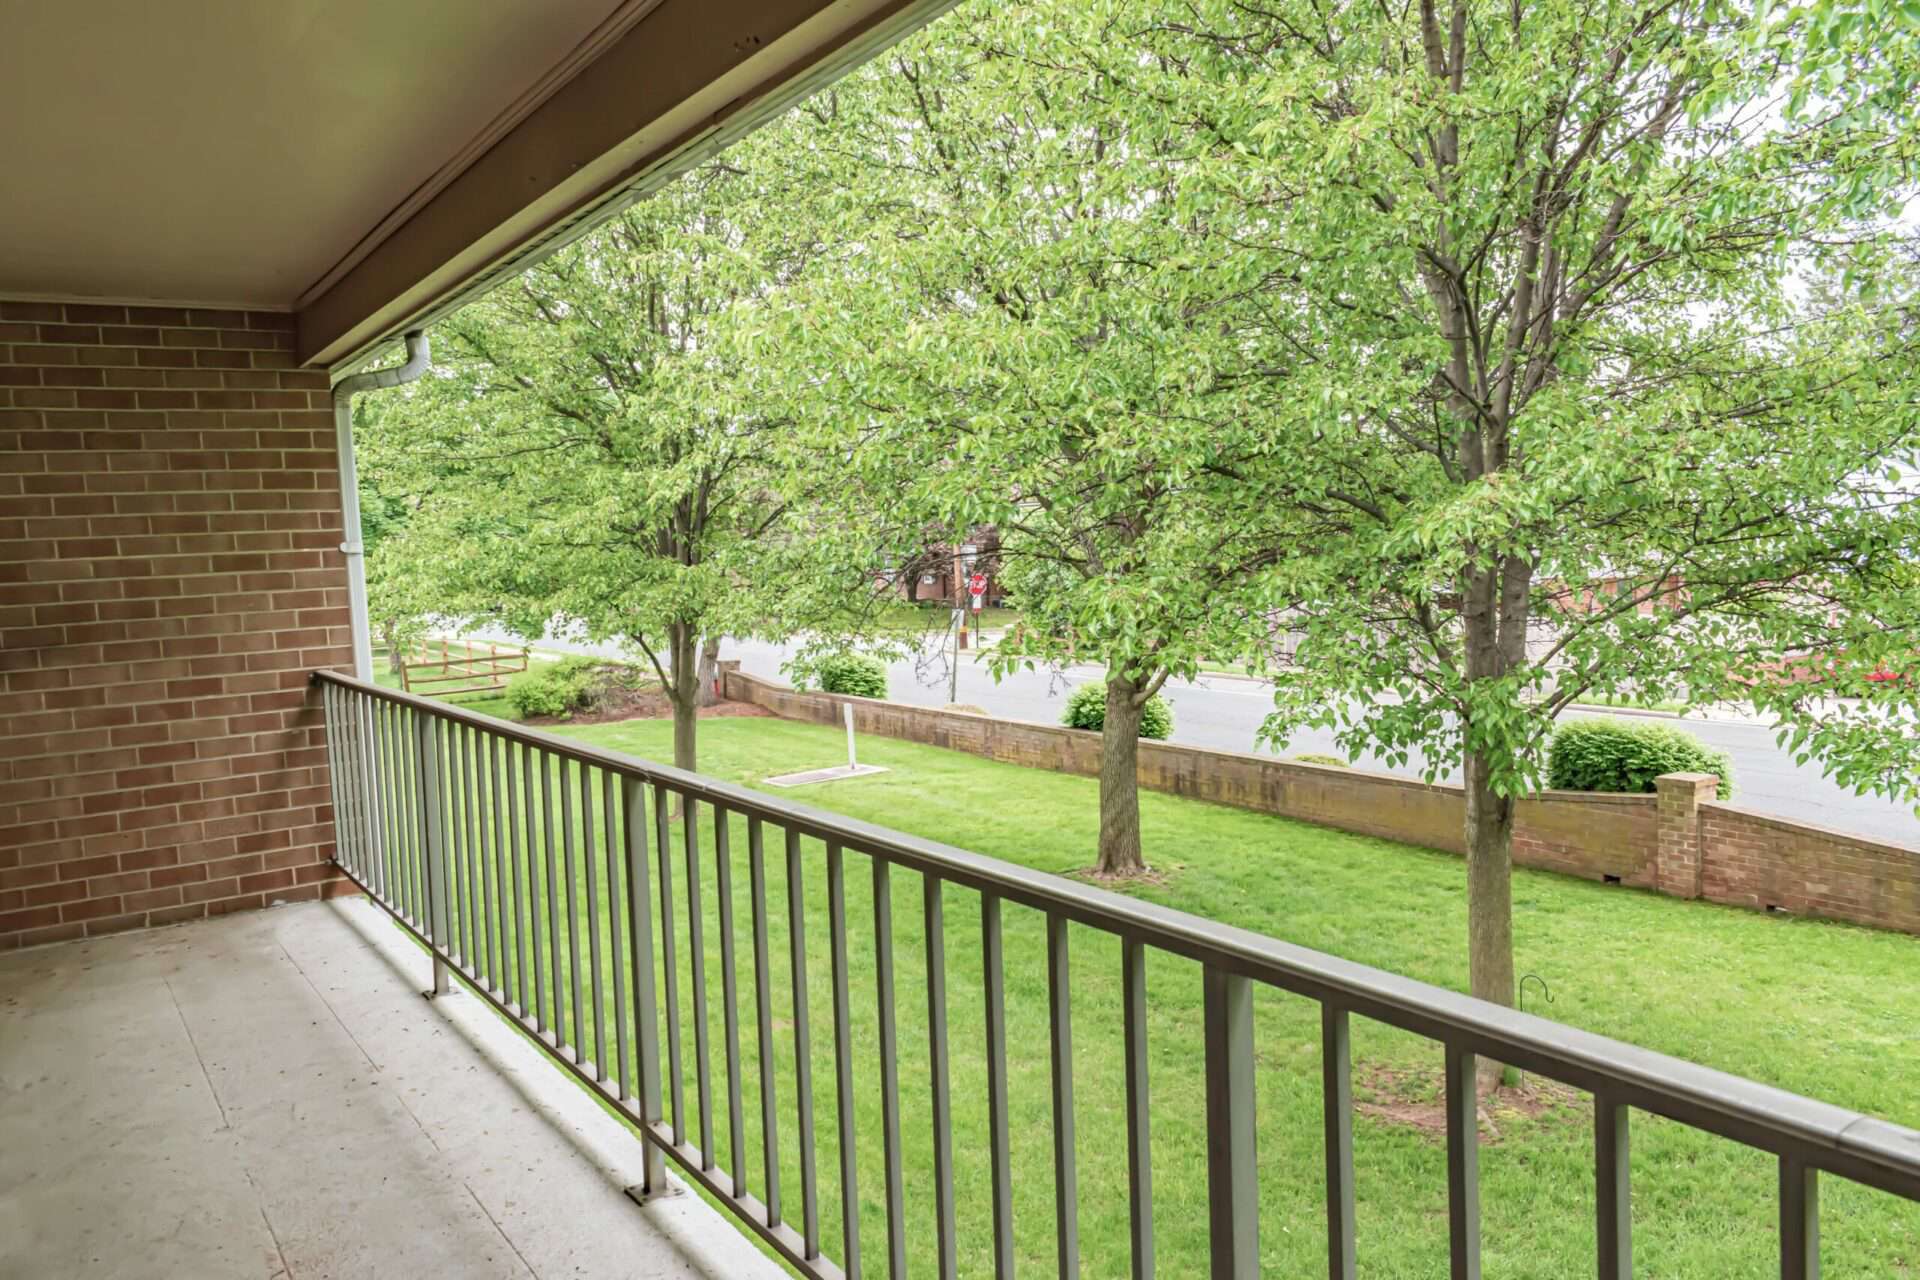 Westover Village balcony from apartment overlooking trees